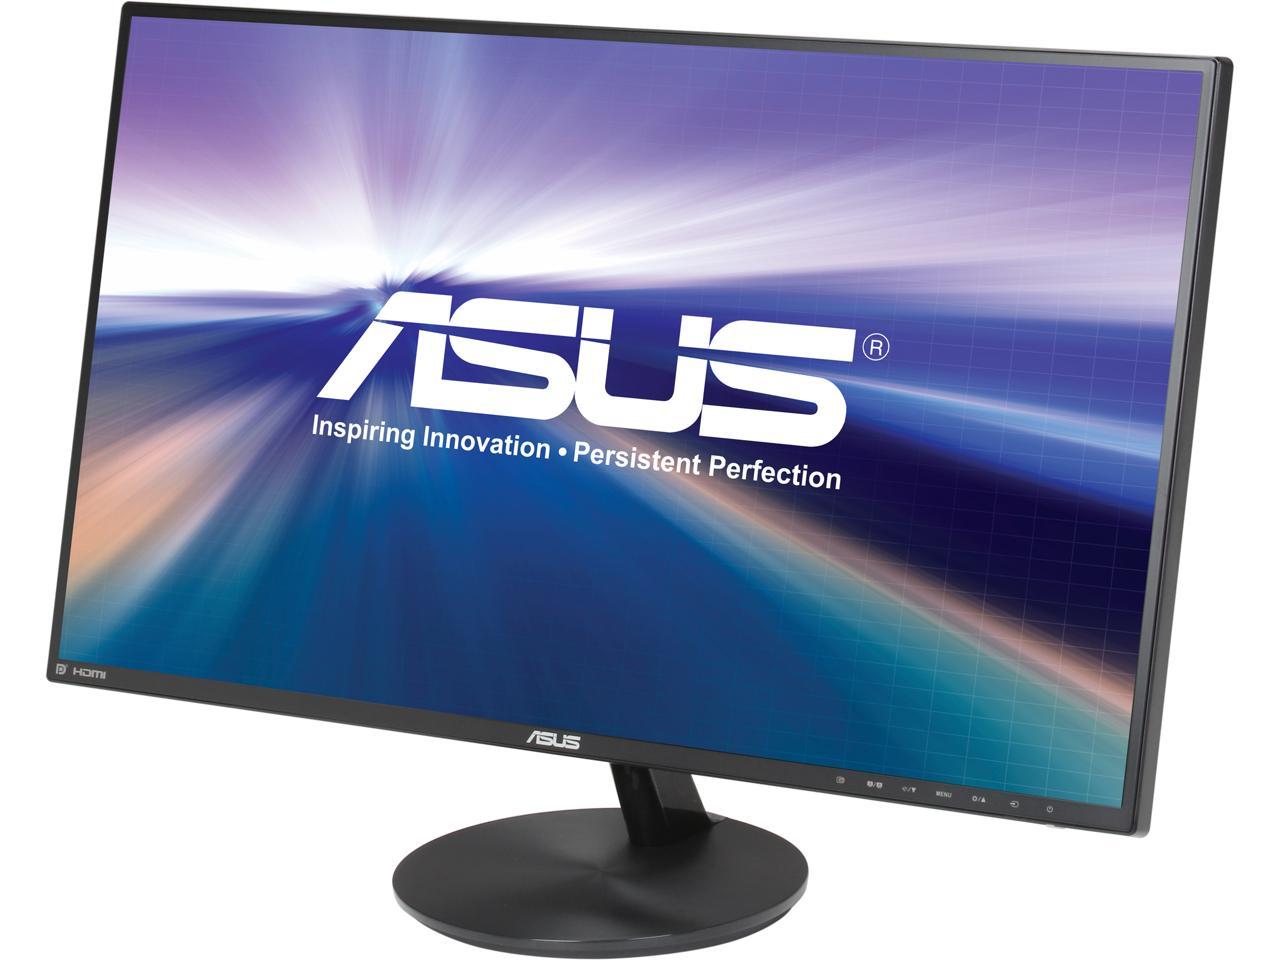 Asus Vn279q 27 19 X 1080 D Sub Hdmi Displayport Built In Speakers Ultra Wide View Monitor With Super Narrow Frame Design Newegg Com